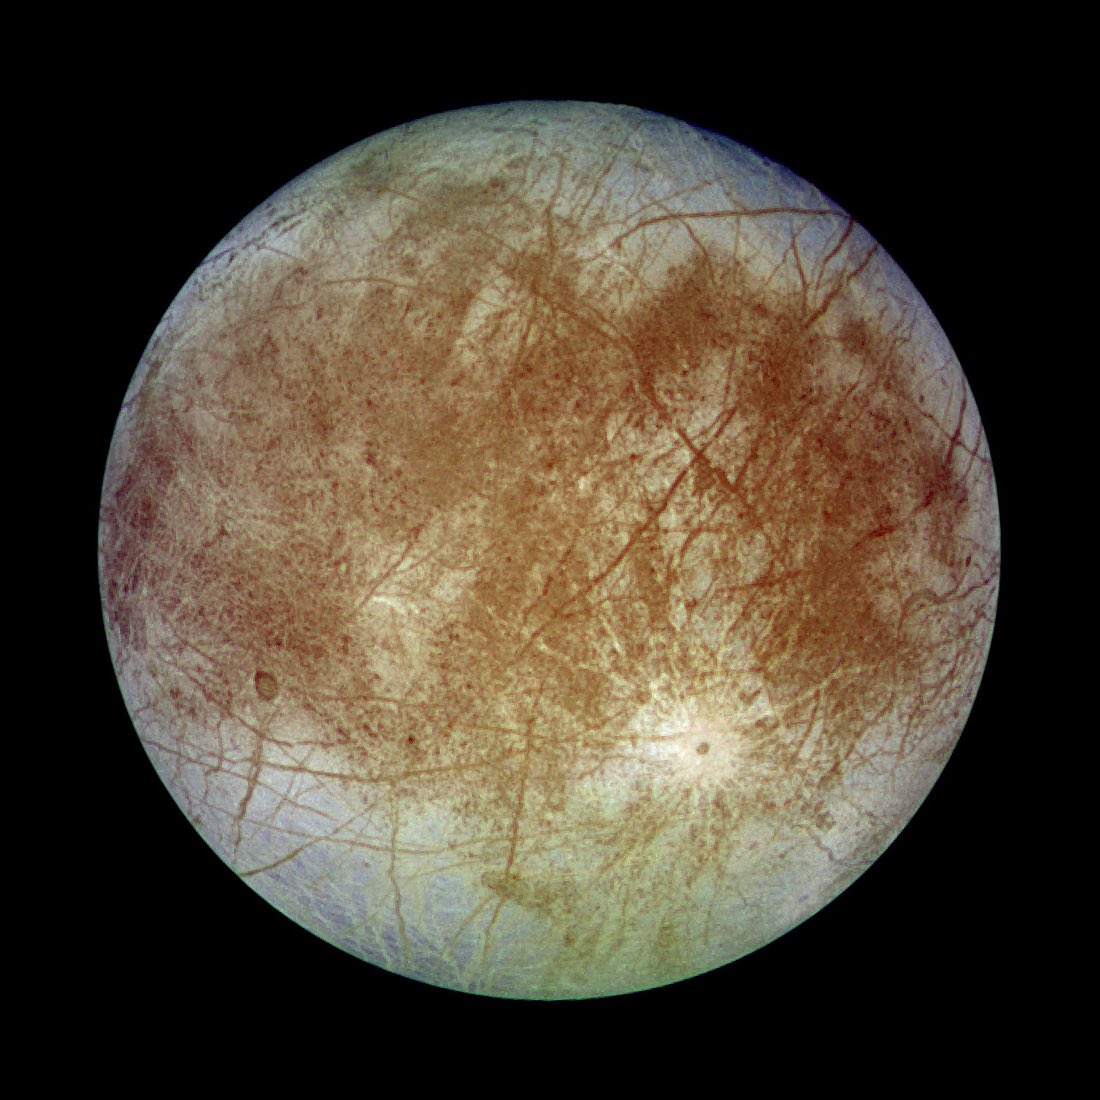 One of Jupiter’s moons is  #Europa, which has a subsurface ocean and crisscrossed with red channels!  #CatsonMoon  #SpaceCats  #ThePlanetsAsCats  #CatsOfTwitter  @NASAJuno  #Jupiter